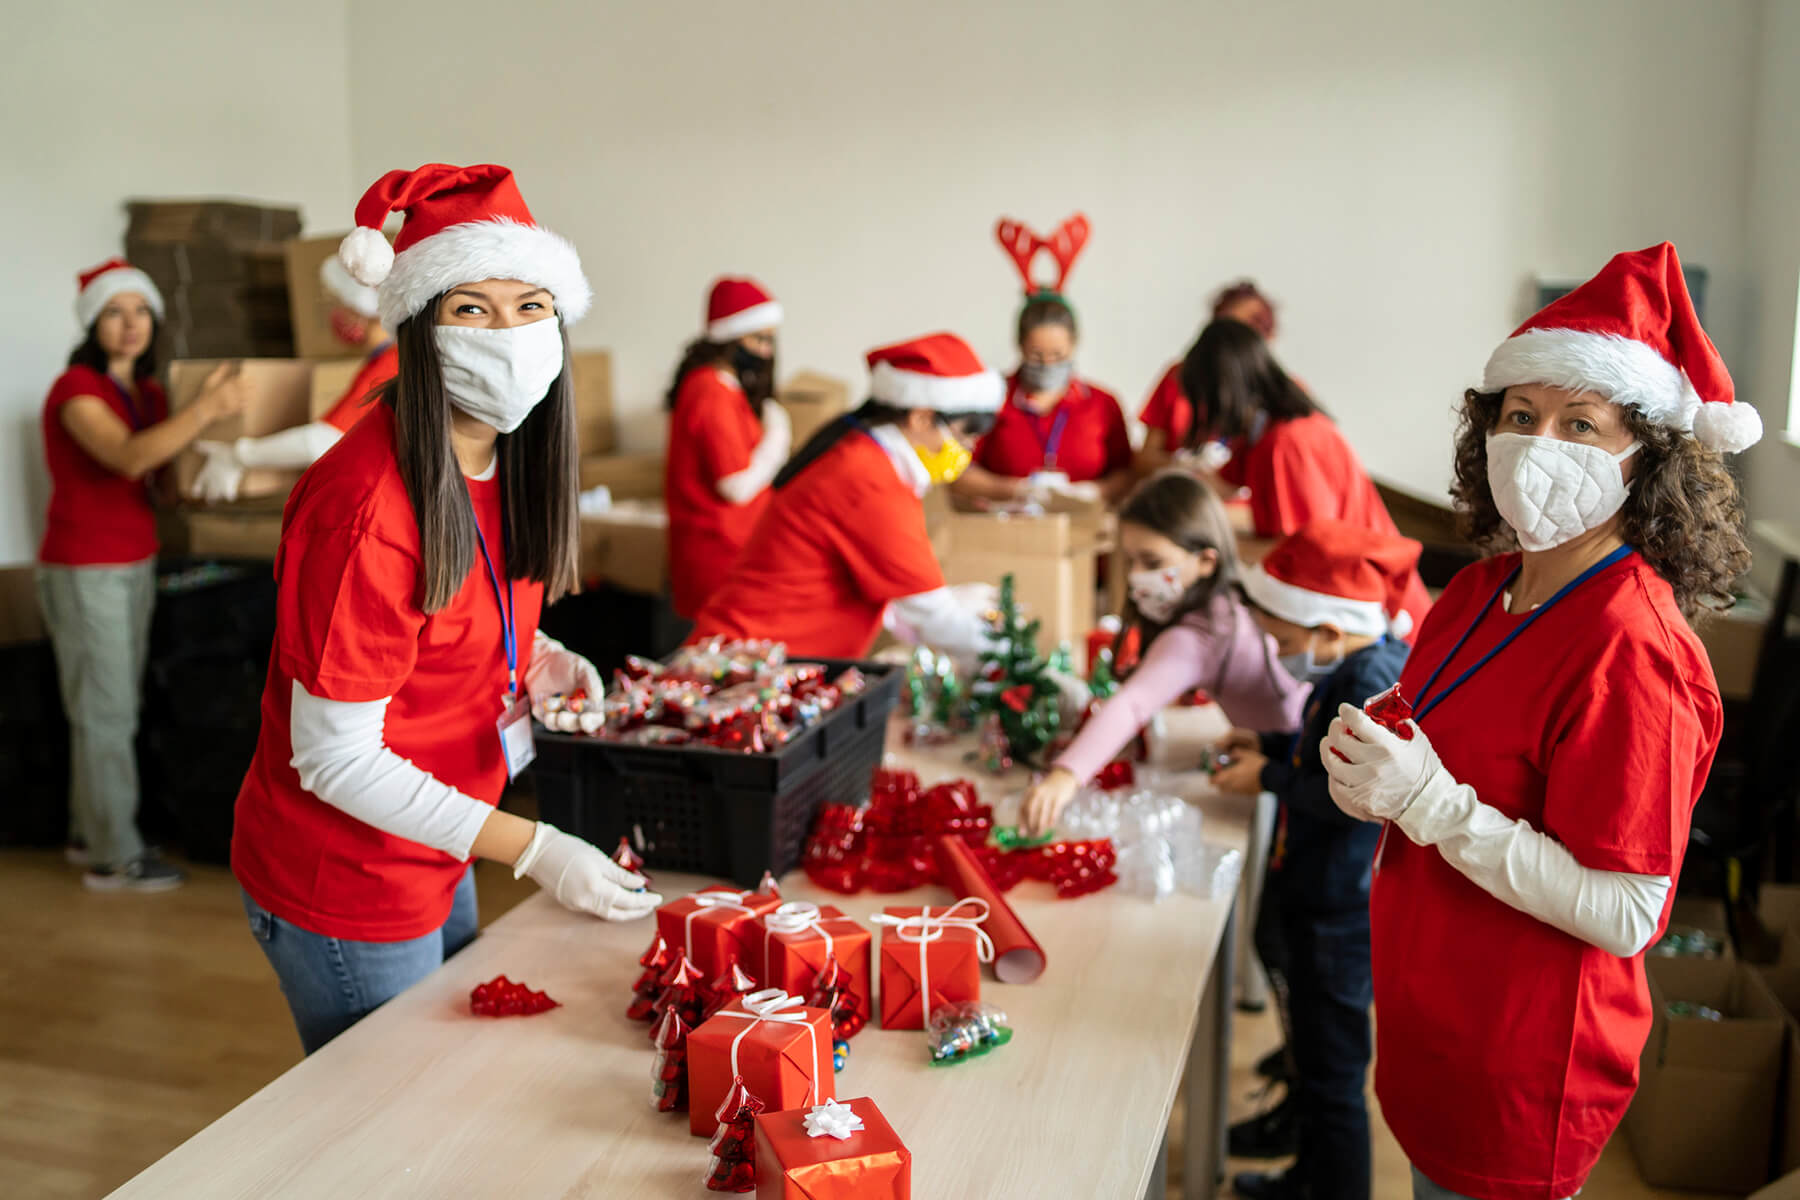 Volunteers with masks wrapping holiday gift donations